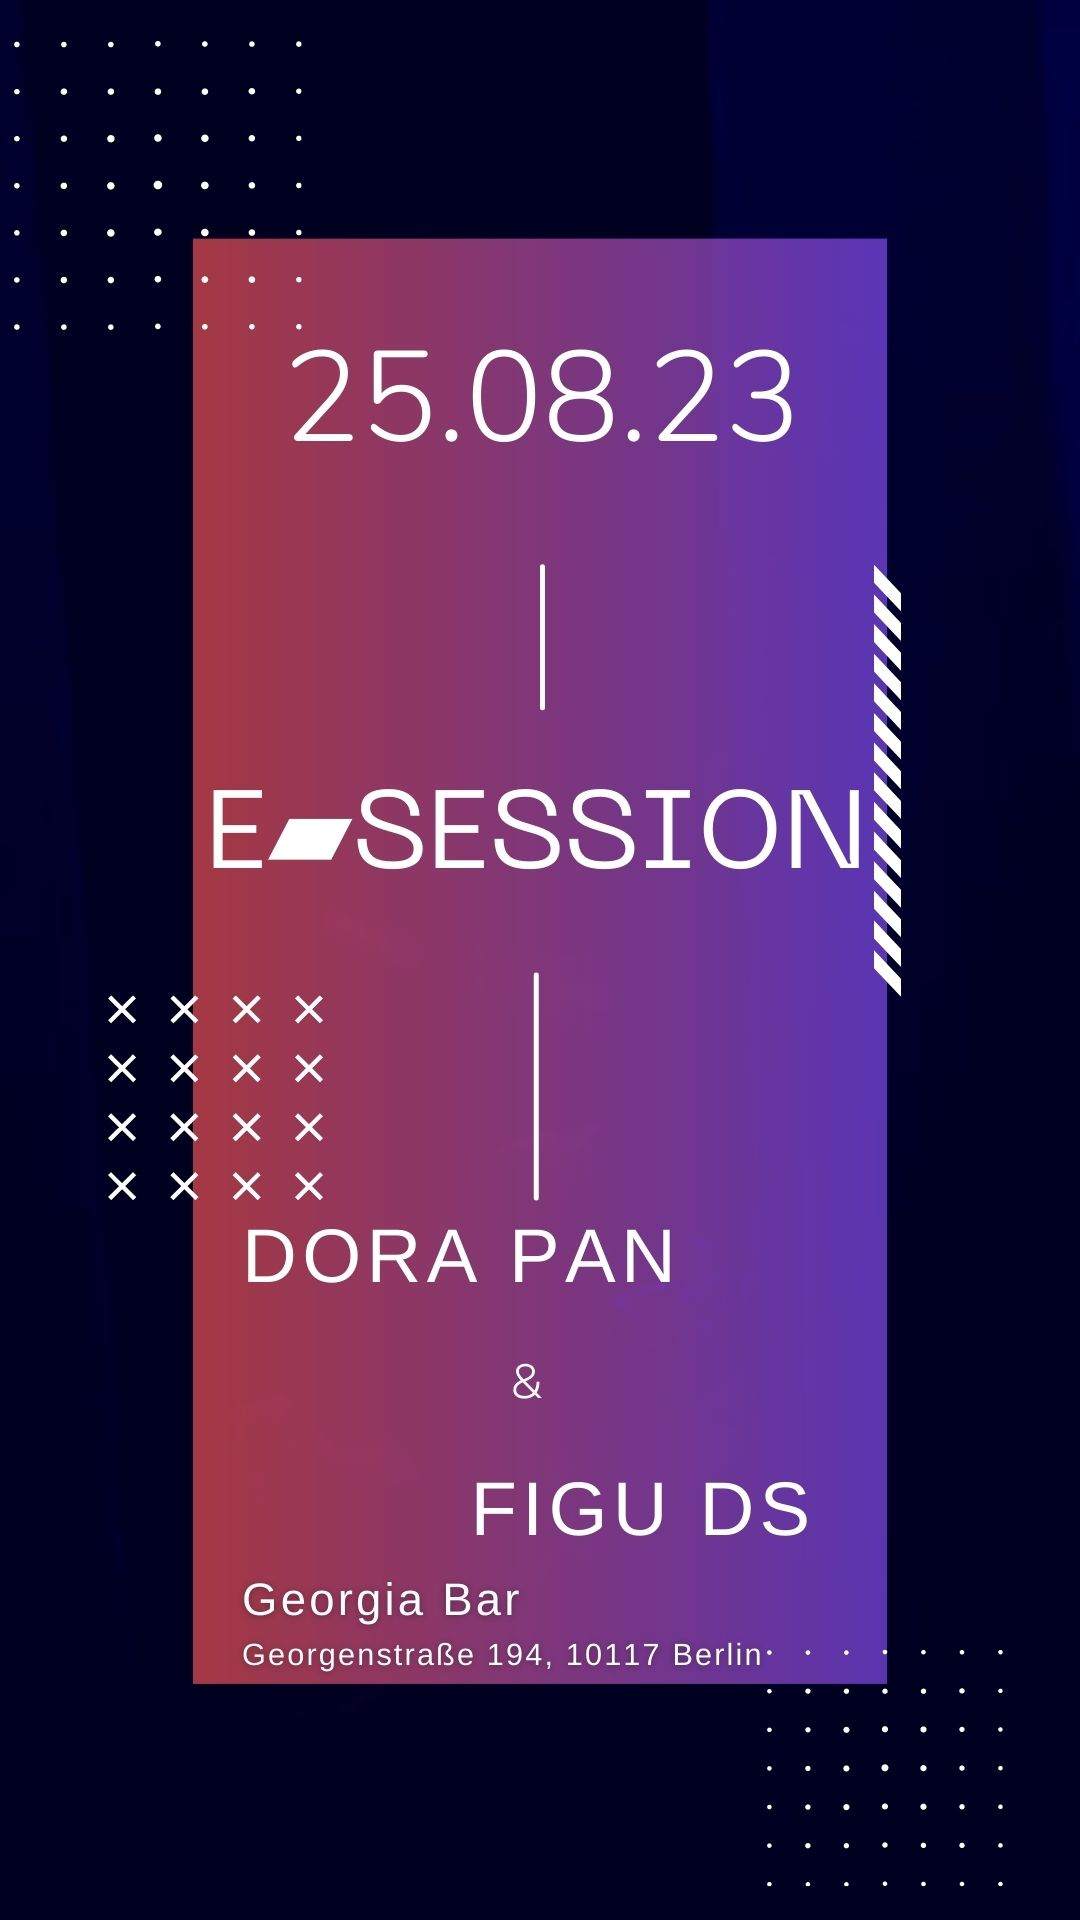 E▰Session with Dora Pan & Figu Ds - フライヤー表